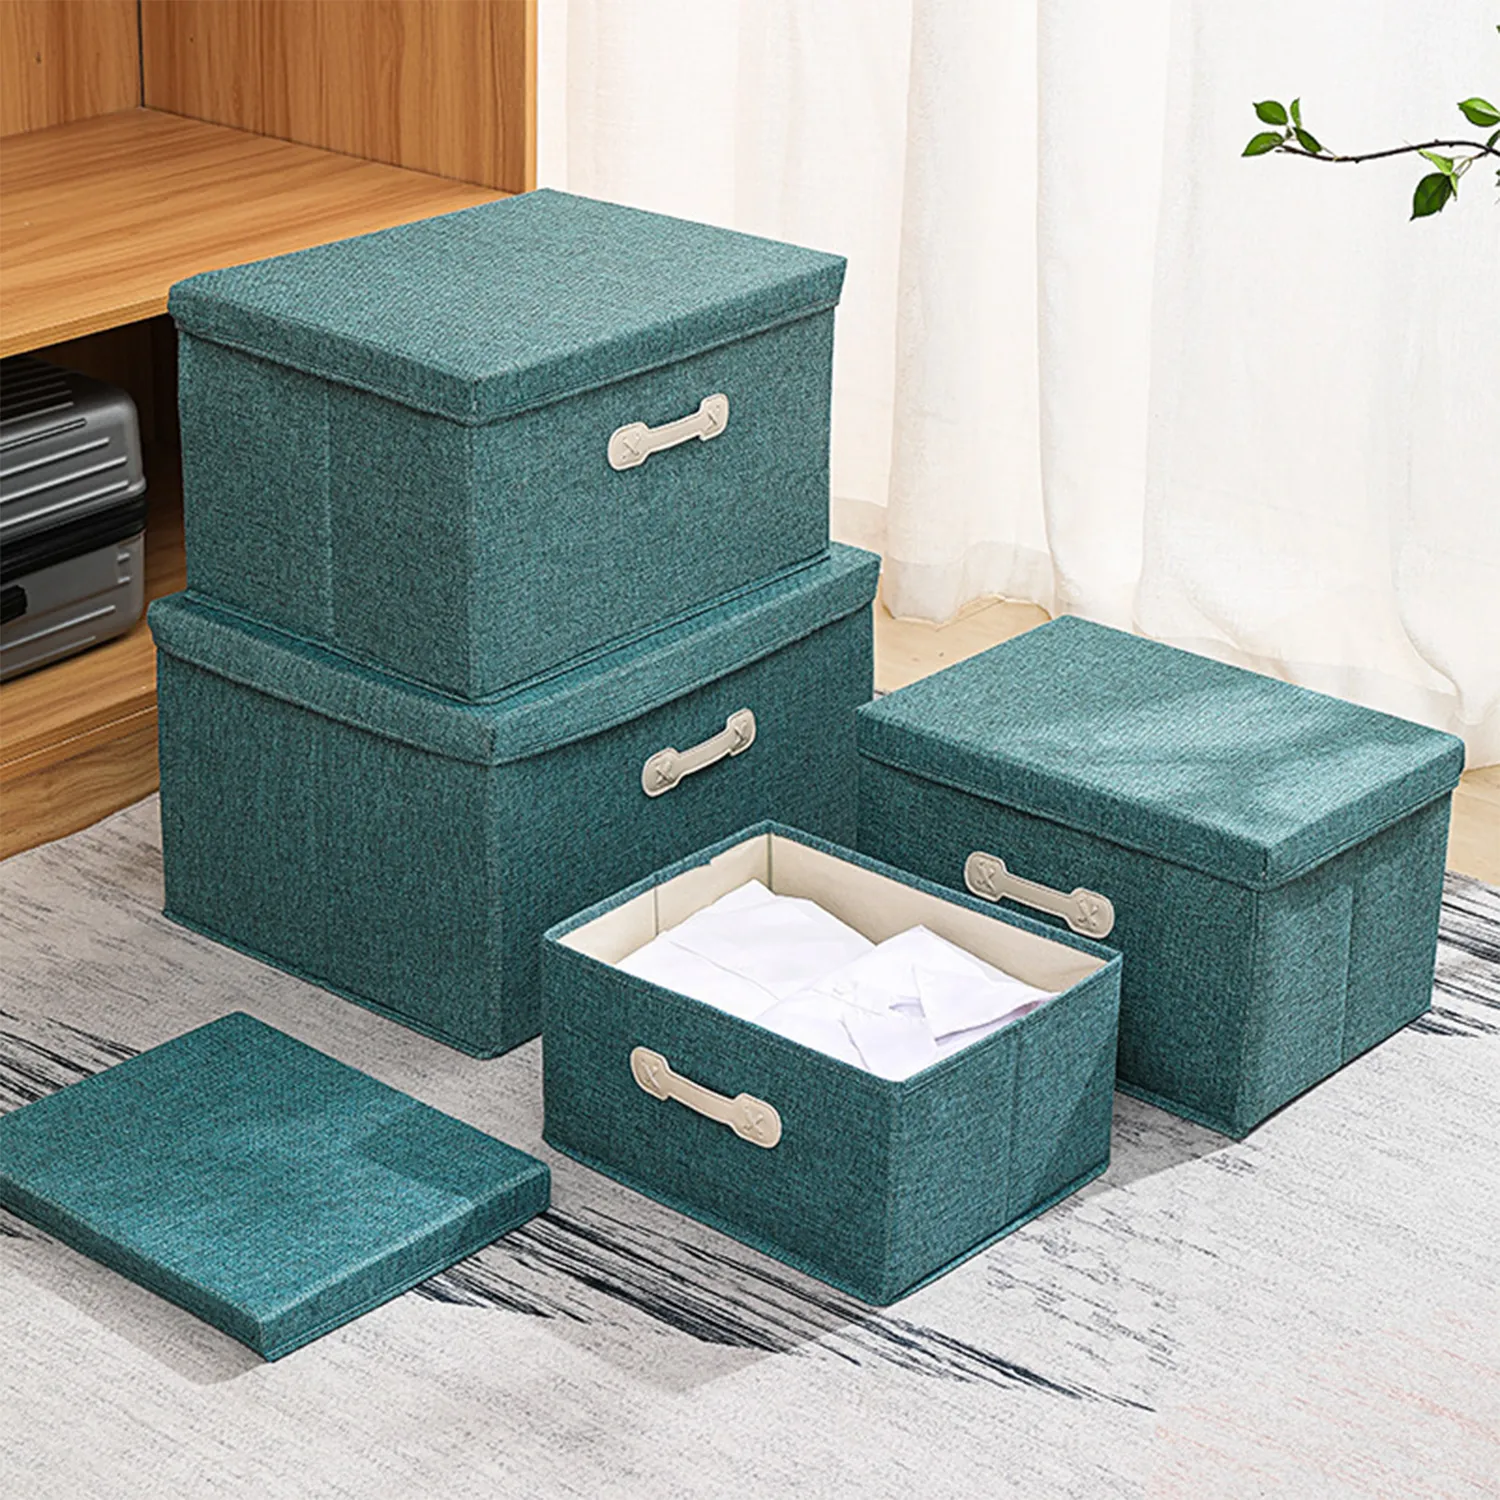 Collapsible Fabric Storage Boxes With Lids Large Decorative